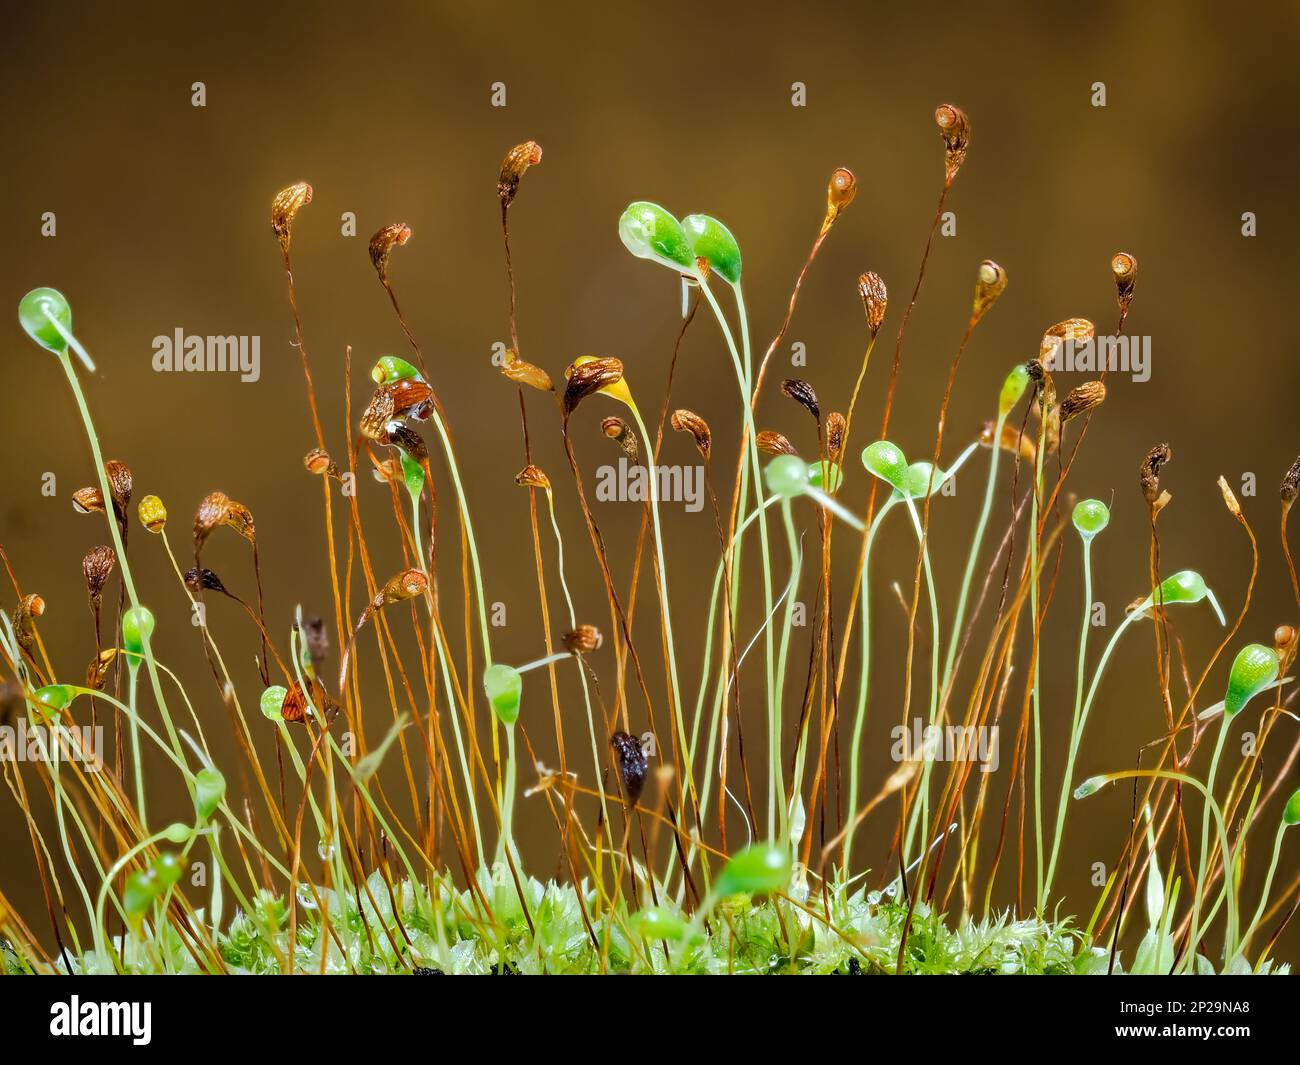 Seed heads of a moss plant photographed against a brown background Stock Photo